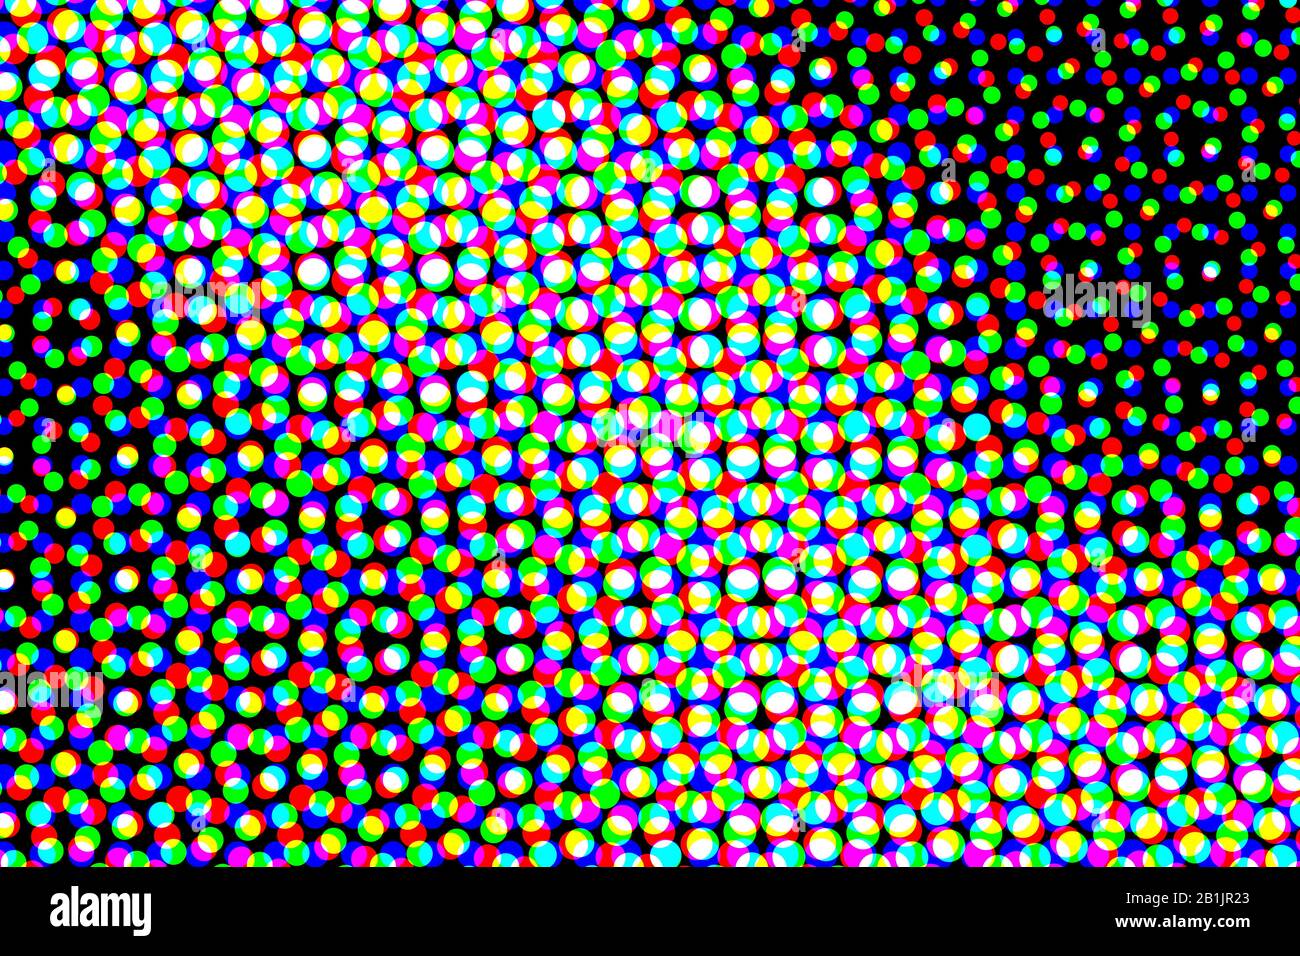 black red blue and white halftone pattern. colorful halftone background and texture. illustration. Stock Photo